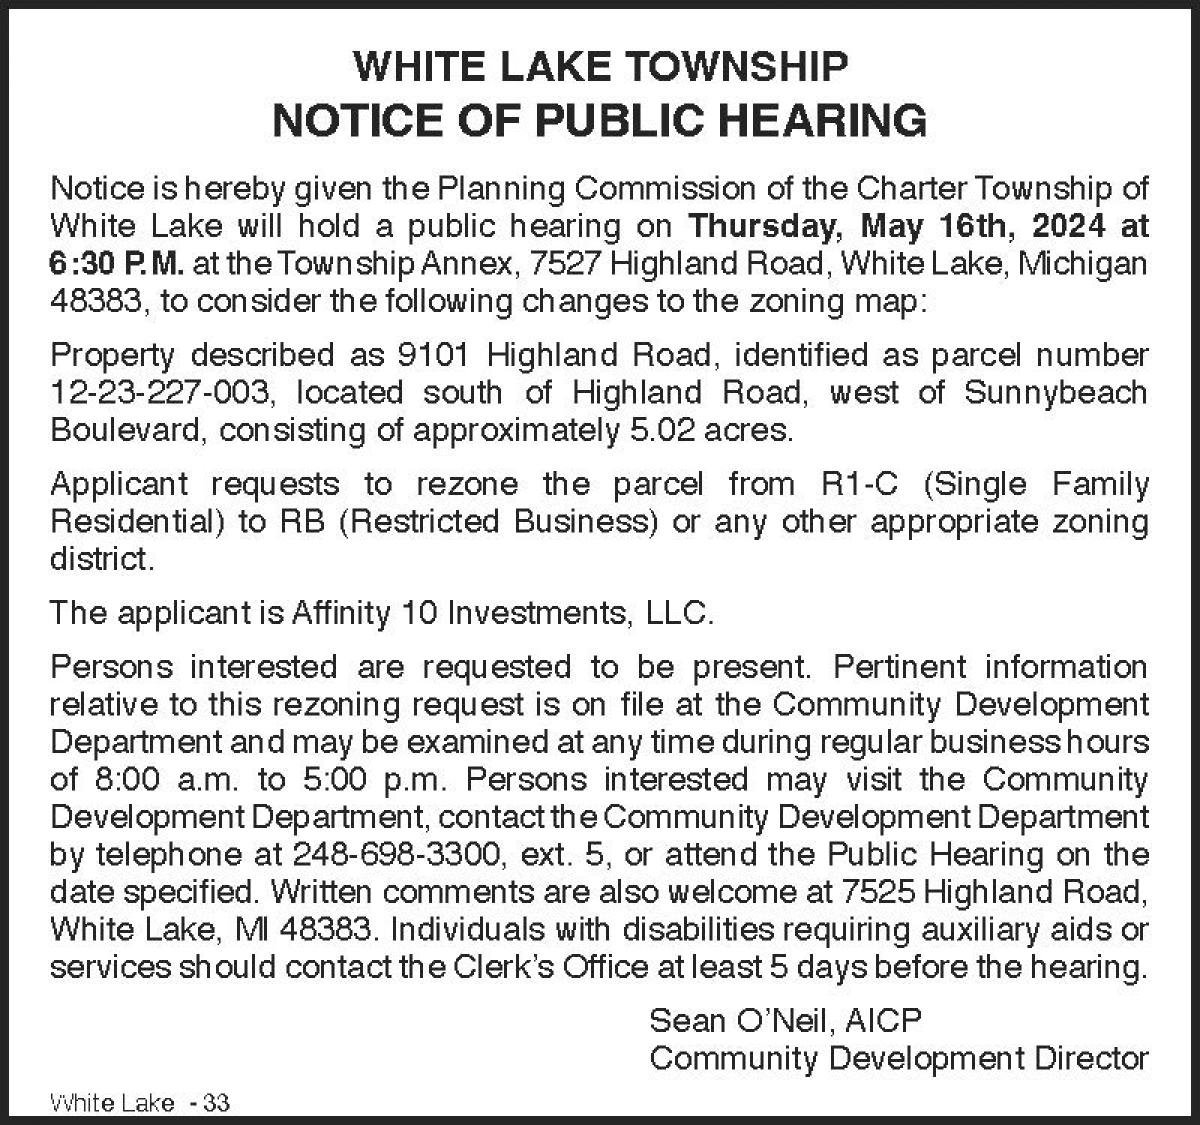 9101 HIGHLAND ROAD REZONING FROM R1-C RESIDENTIAL TO RB RESTRICTED BUSINESS